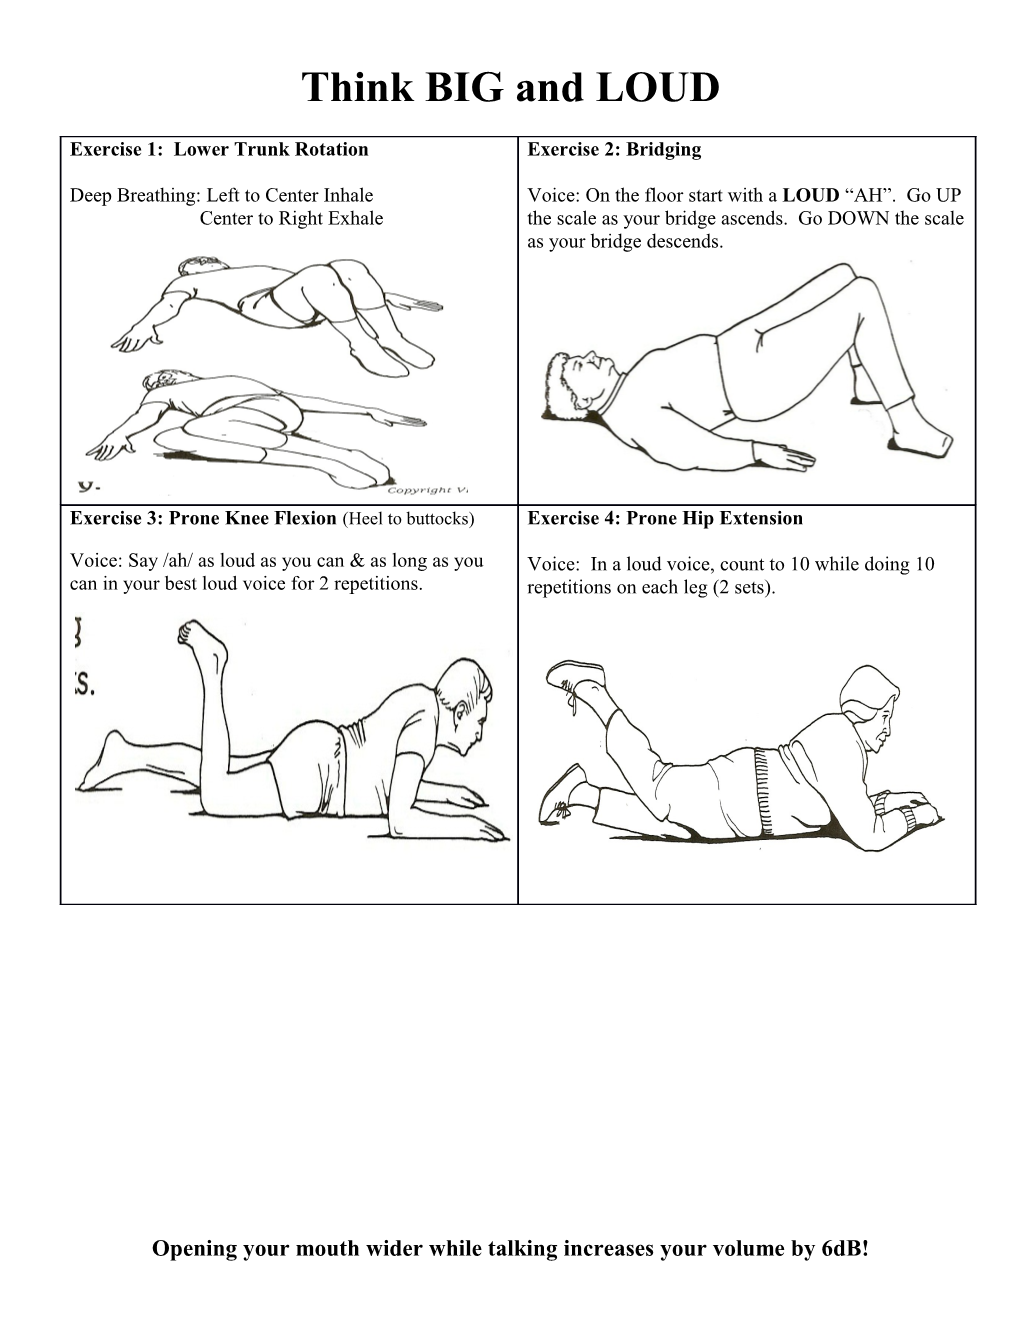 Exercise 1: Lower Trunk Rotation